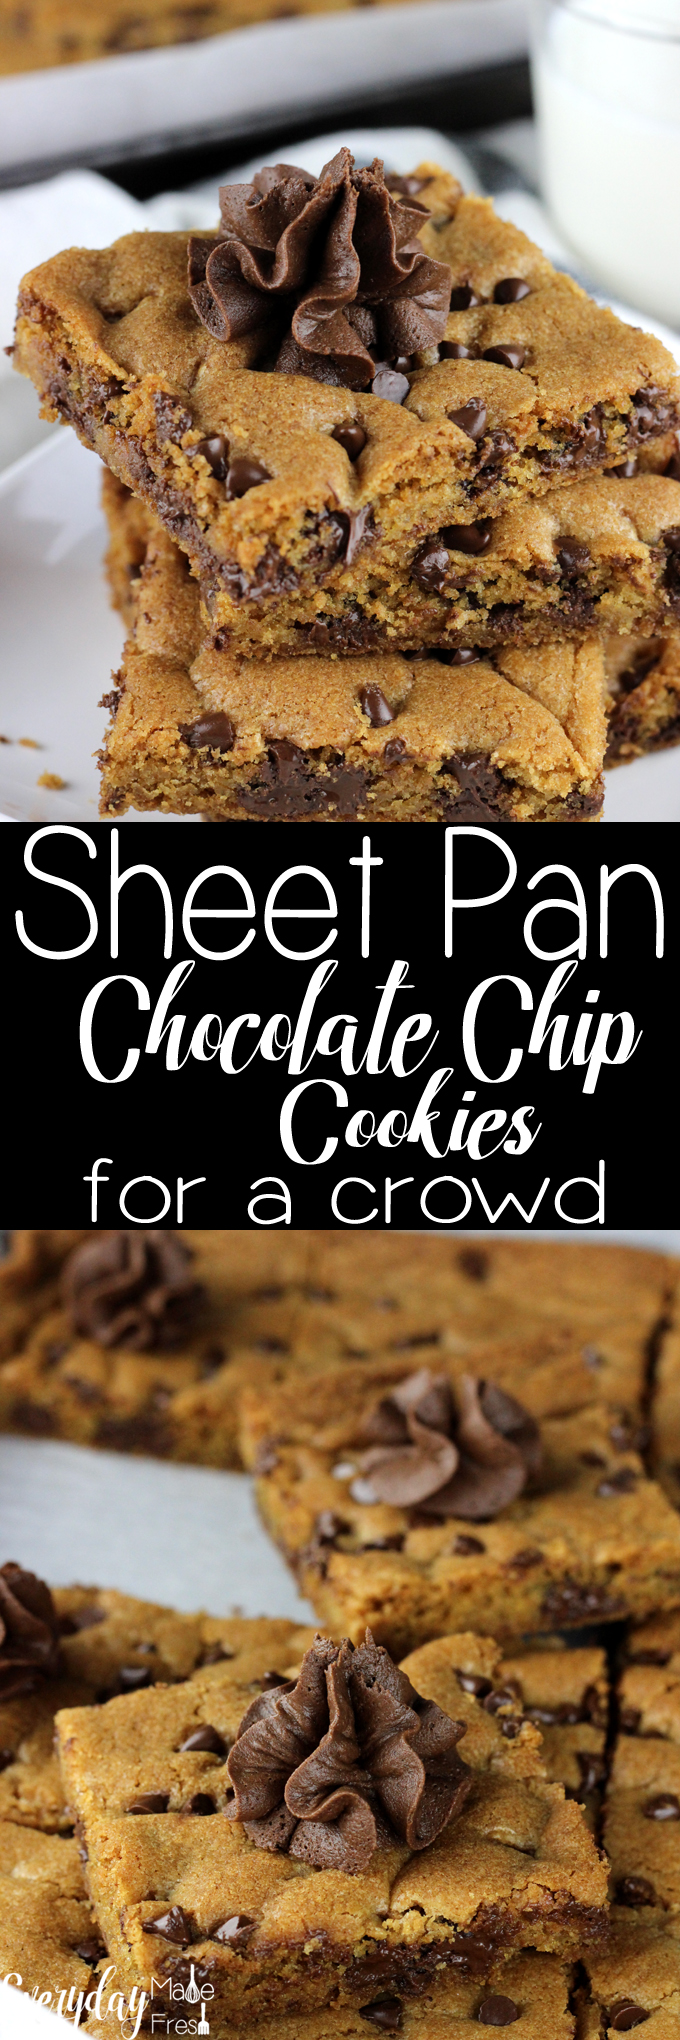 Feeding warm cookies to a crowd can sometimes take a while since you are limited to how many you can bake at one time. However, with these Sheet Pan Chocolate Chip Cookies for a Crowd, we've eliminated that problem. 24 warm cookies all on one pan! | EverydayMadeFresh.com